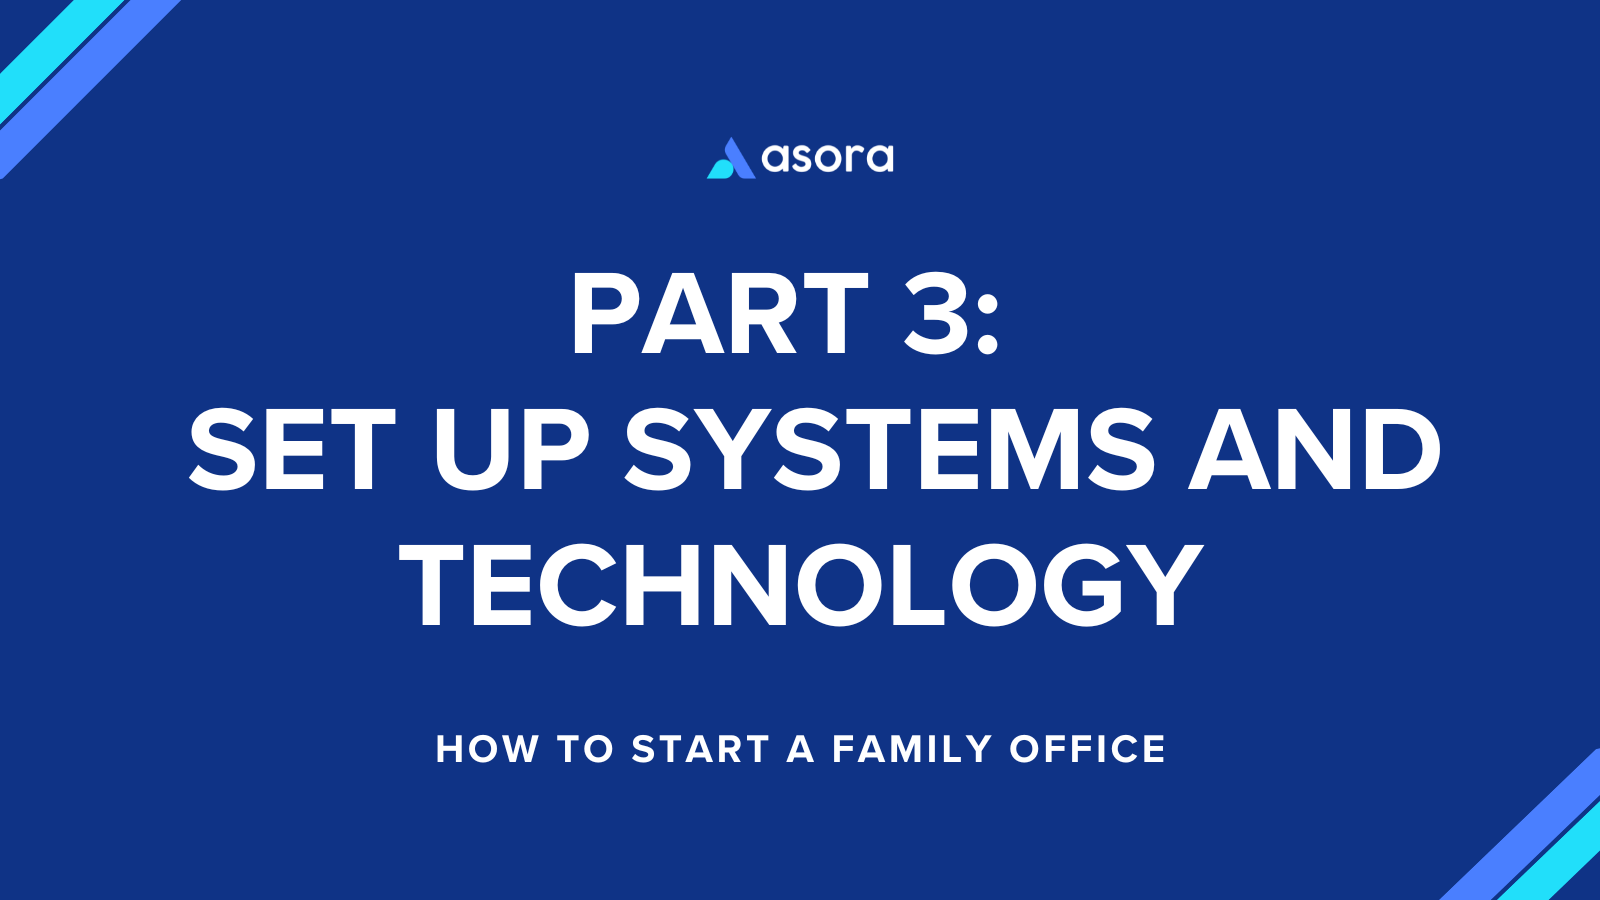 Family office technology